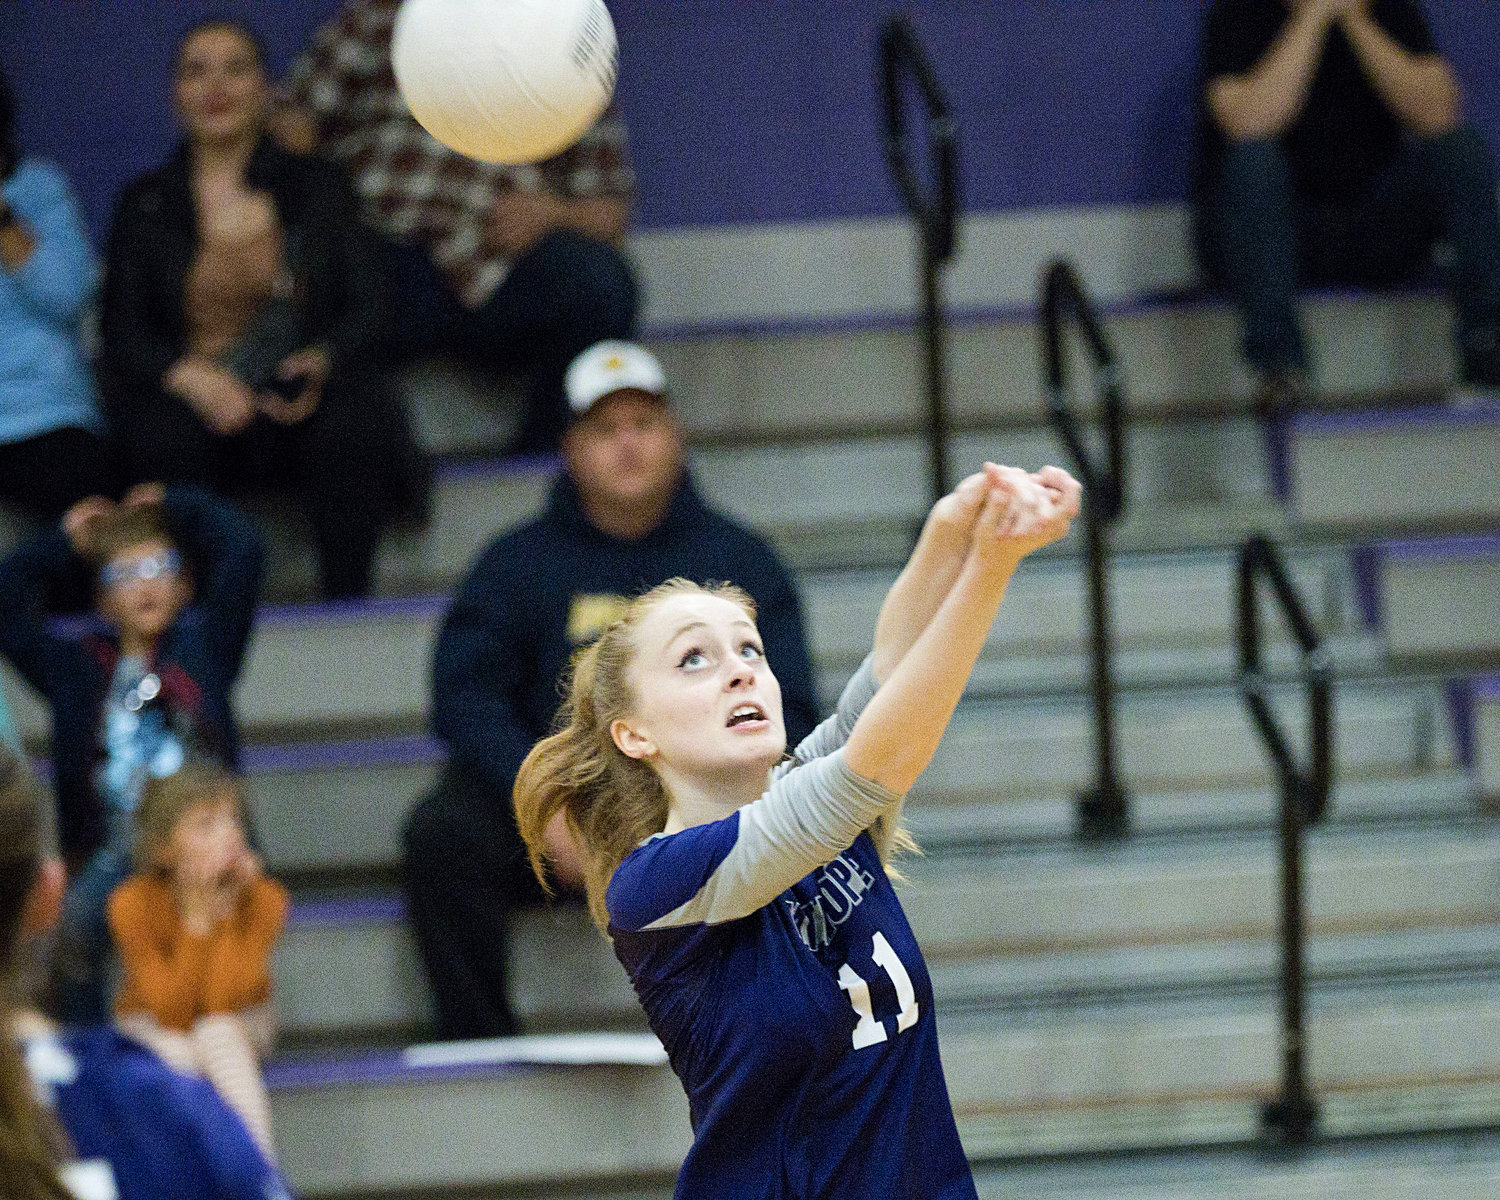 Jillian Brown sends the ball over the net while competing with Lincoln in the DII Preliminary game, Tuesday.